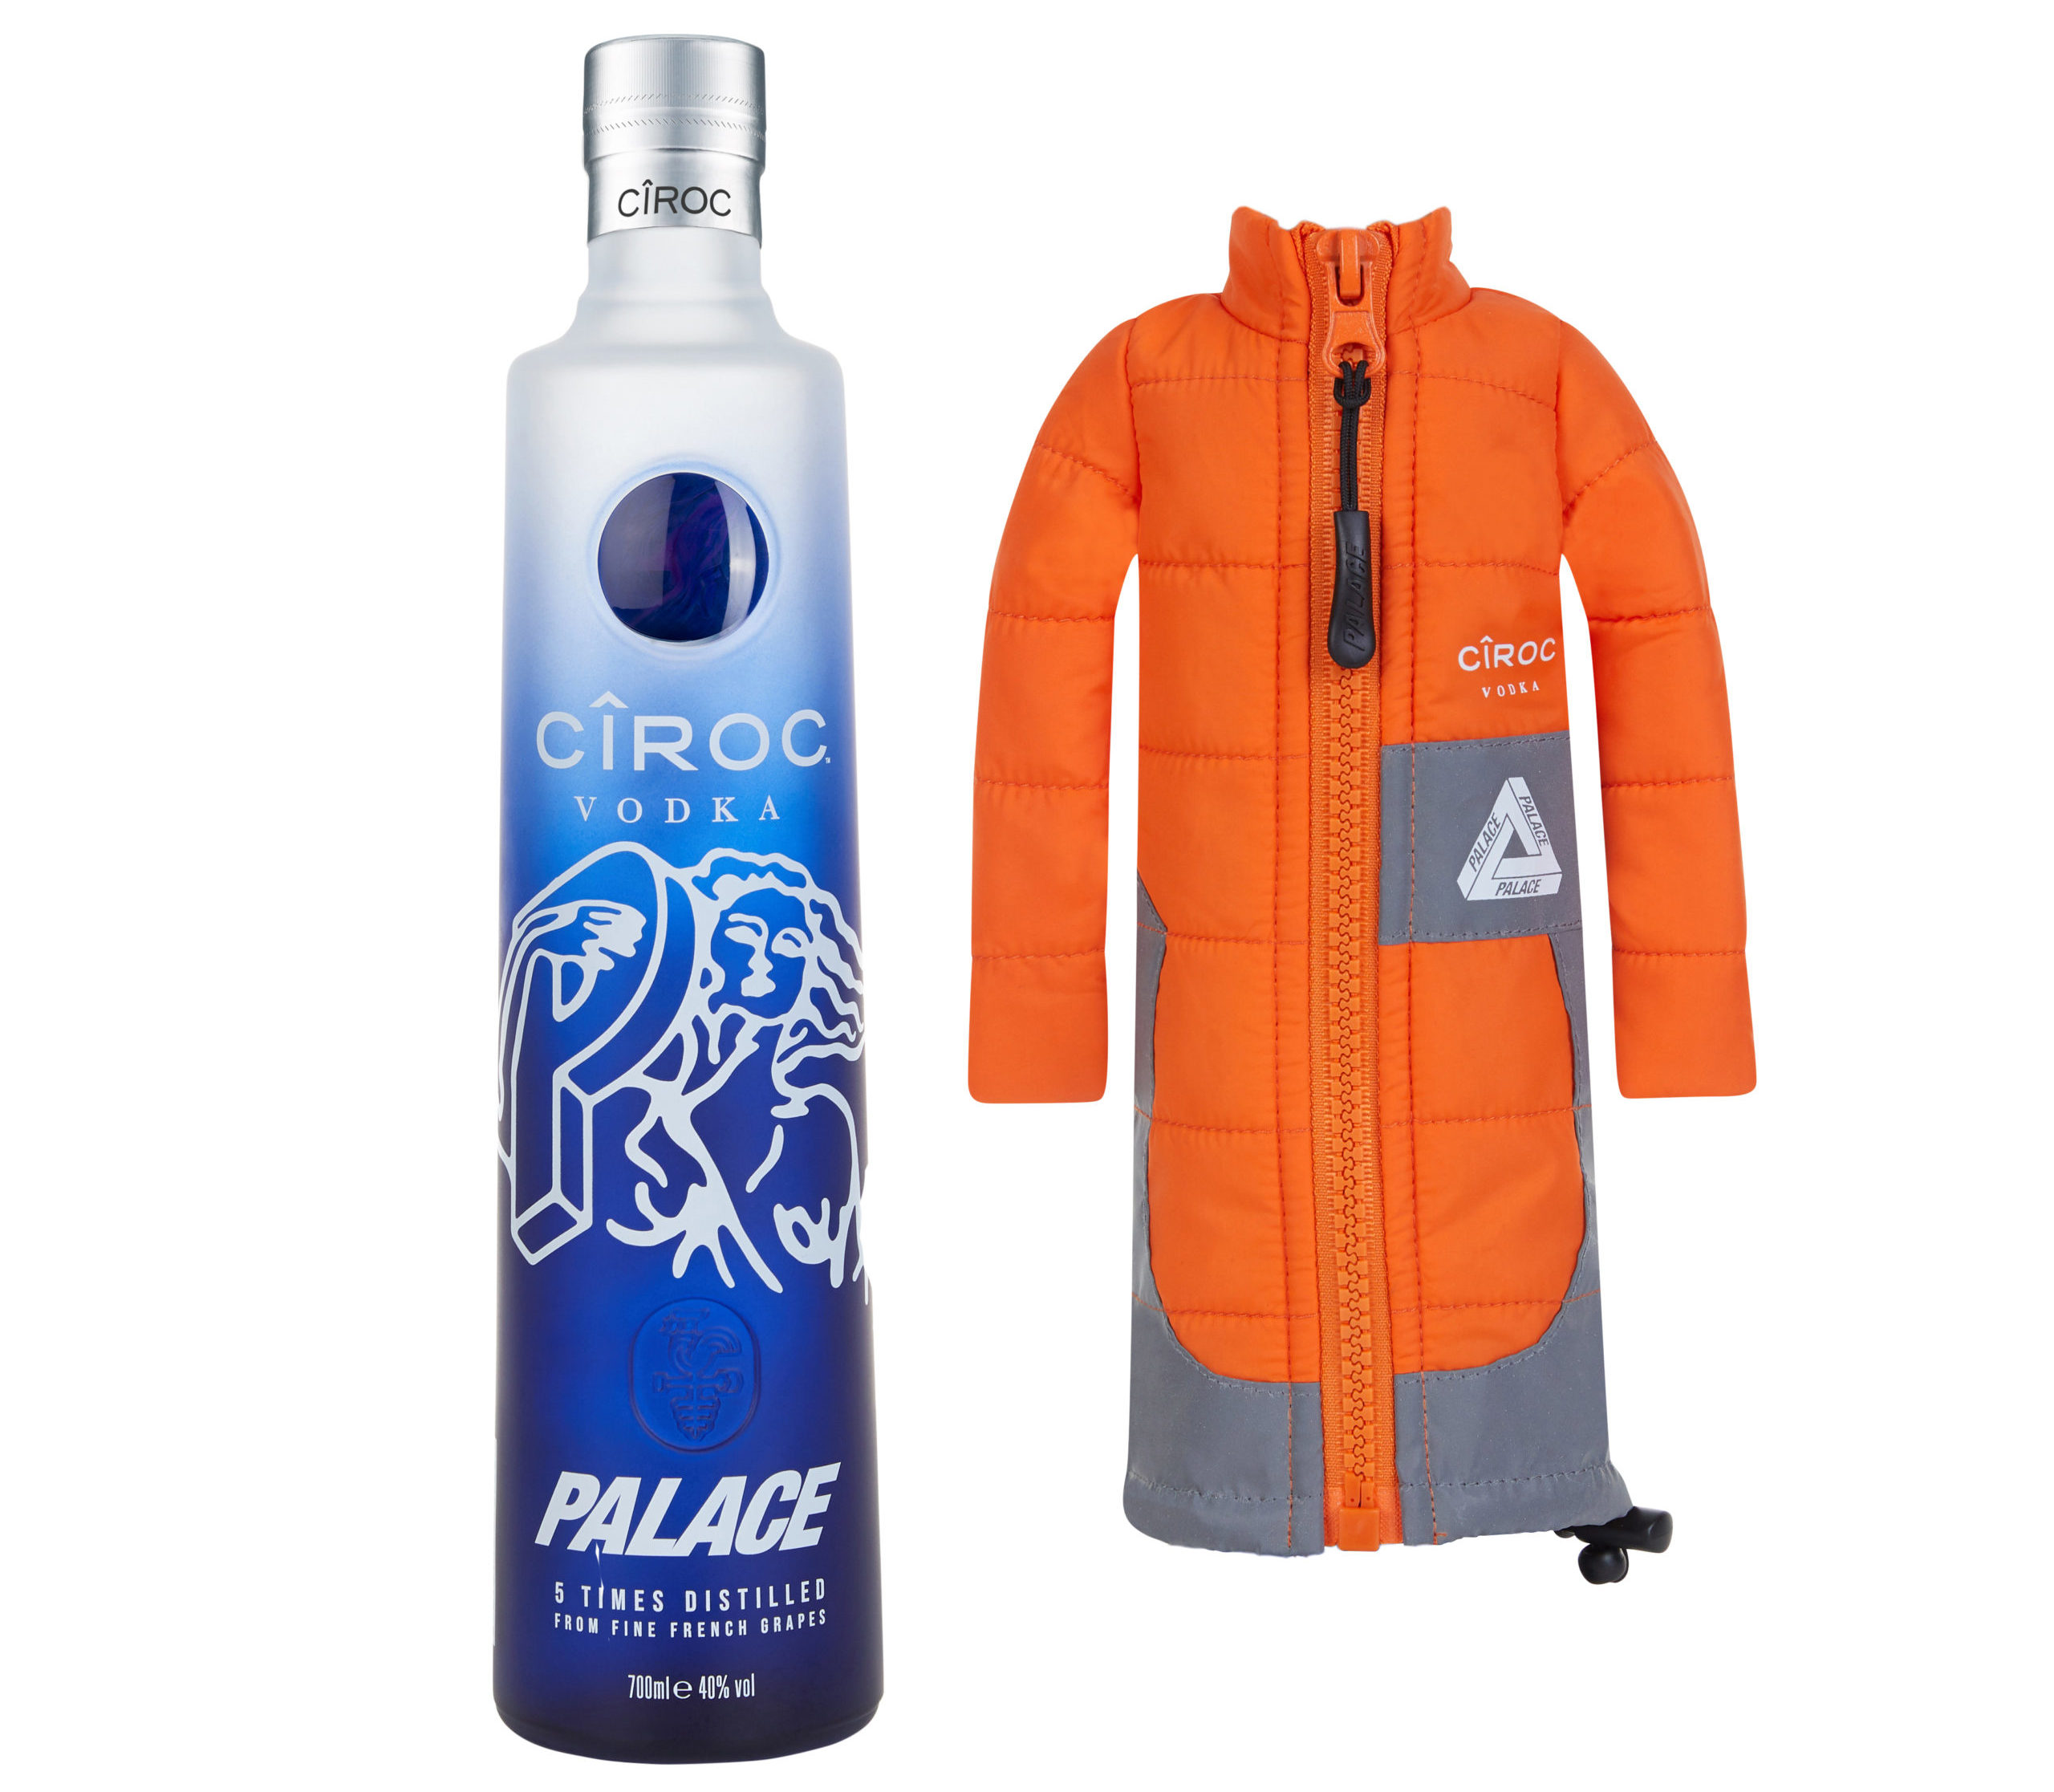 PALACE, CIROC, collab, limited edition, lappoms, lifestyle blog